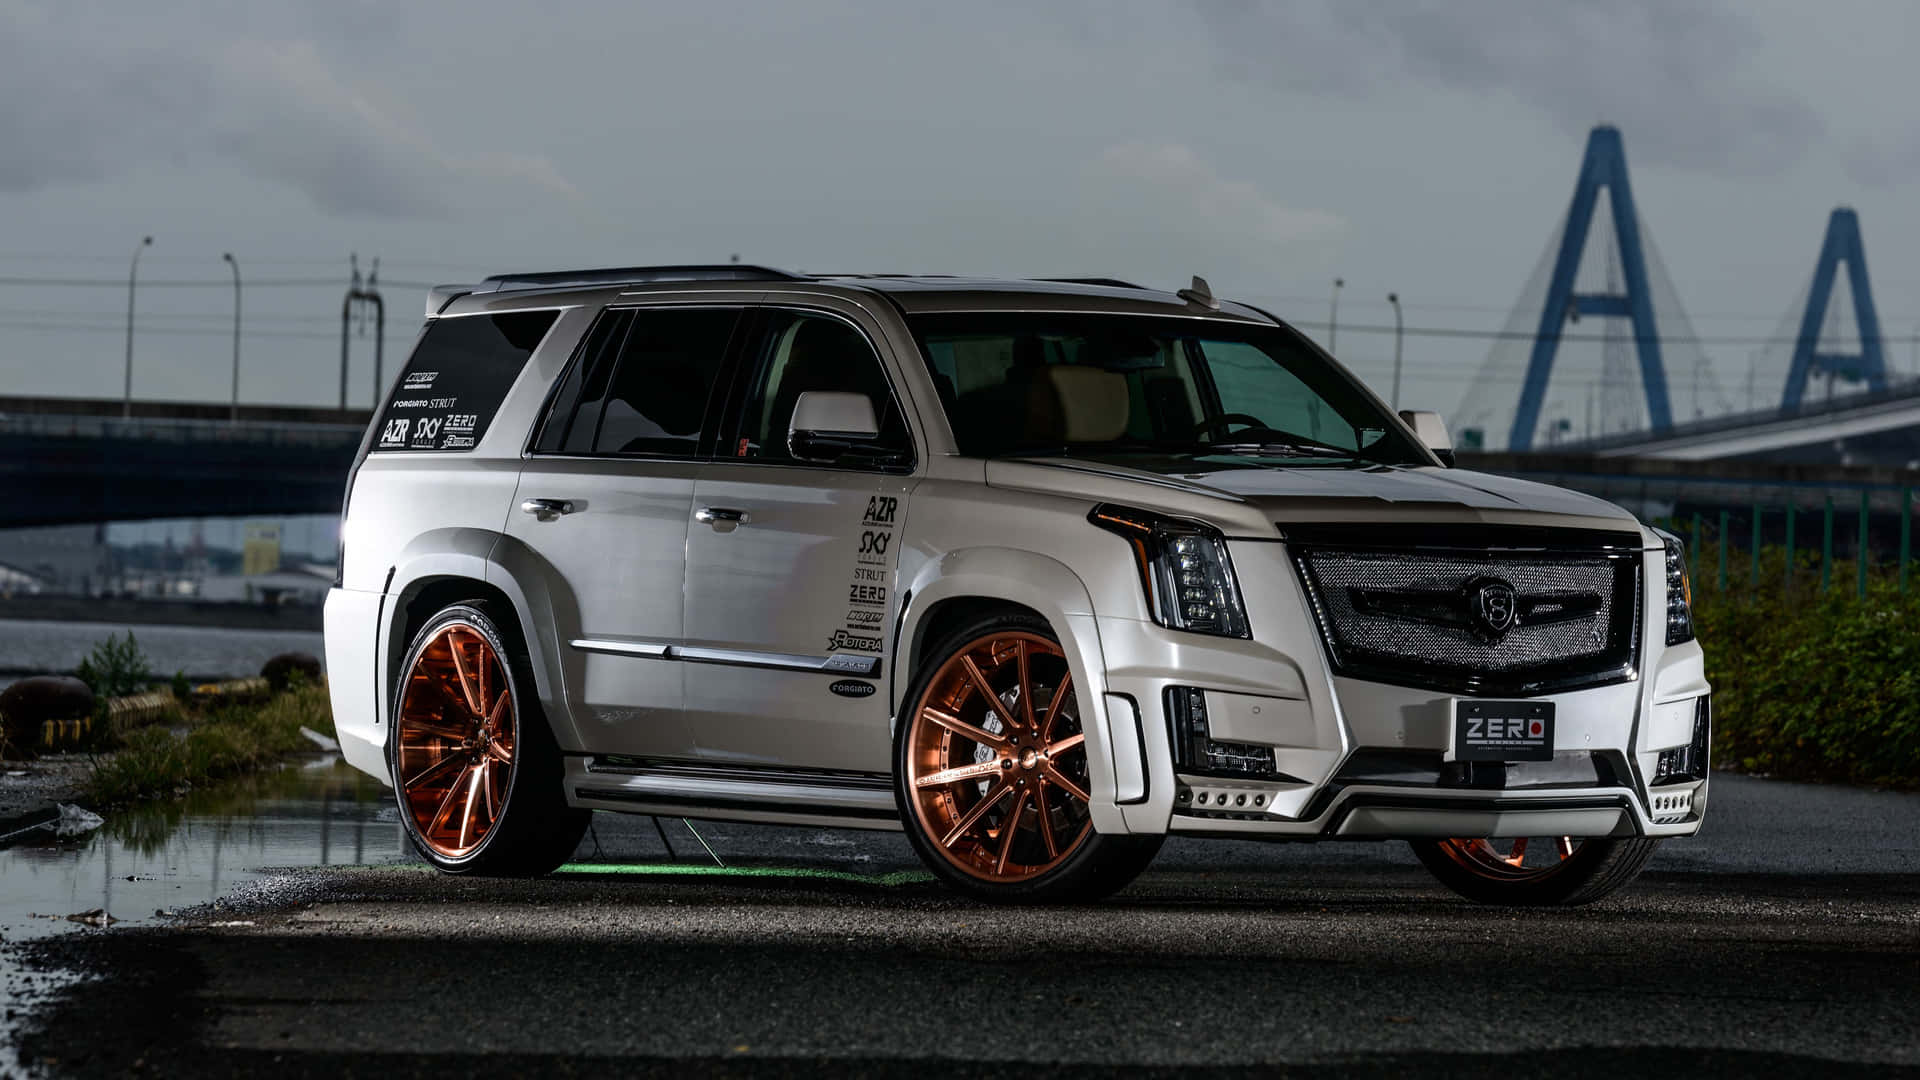 Stunning Cadillac Escalade in All its Glory Wallpaper